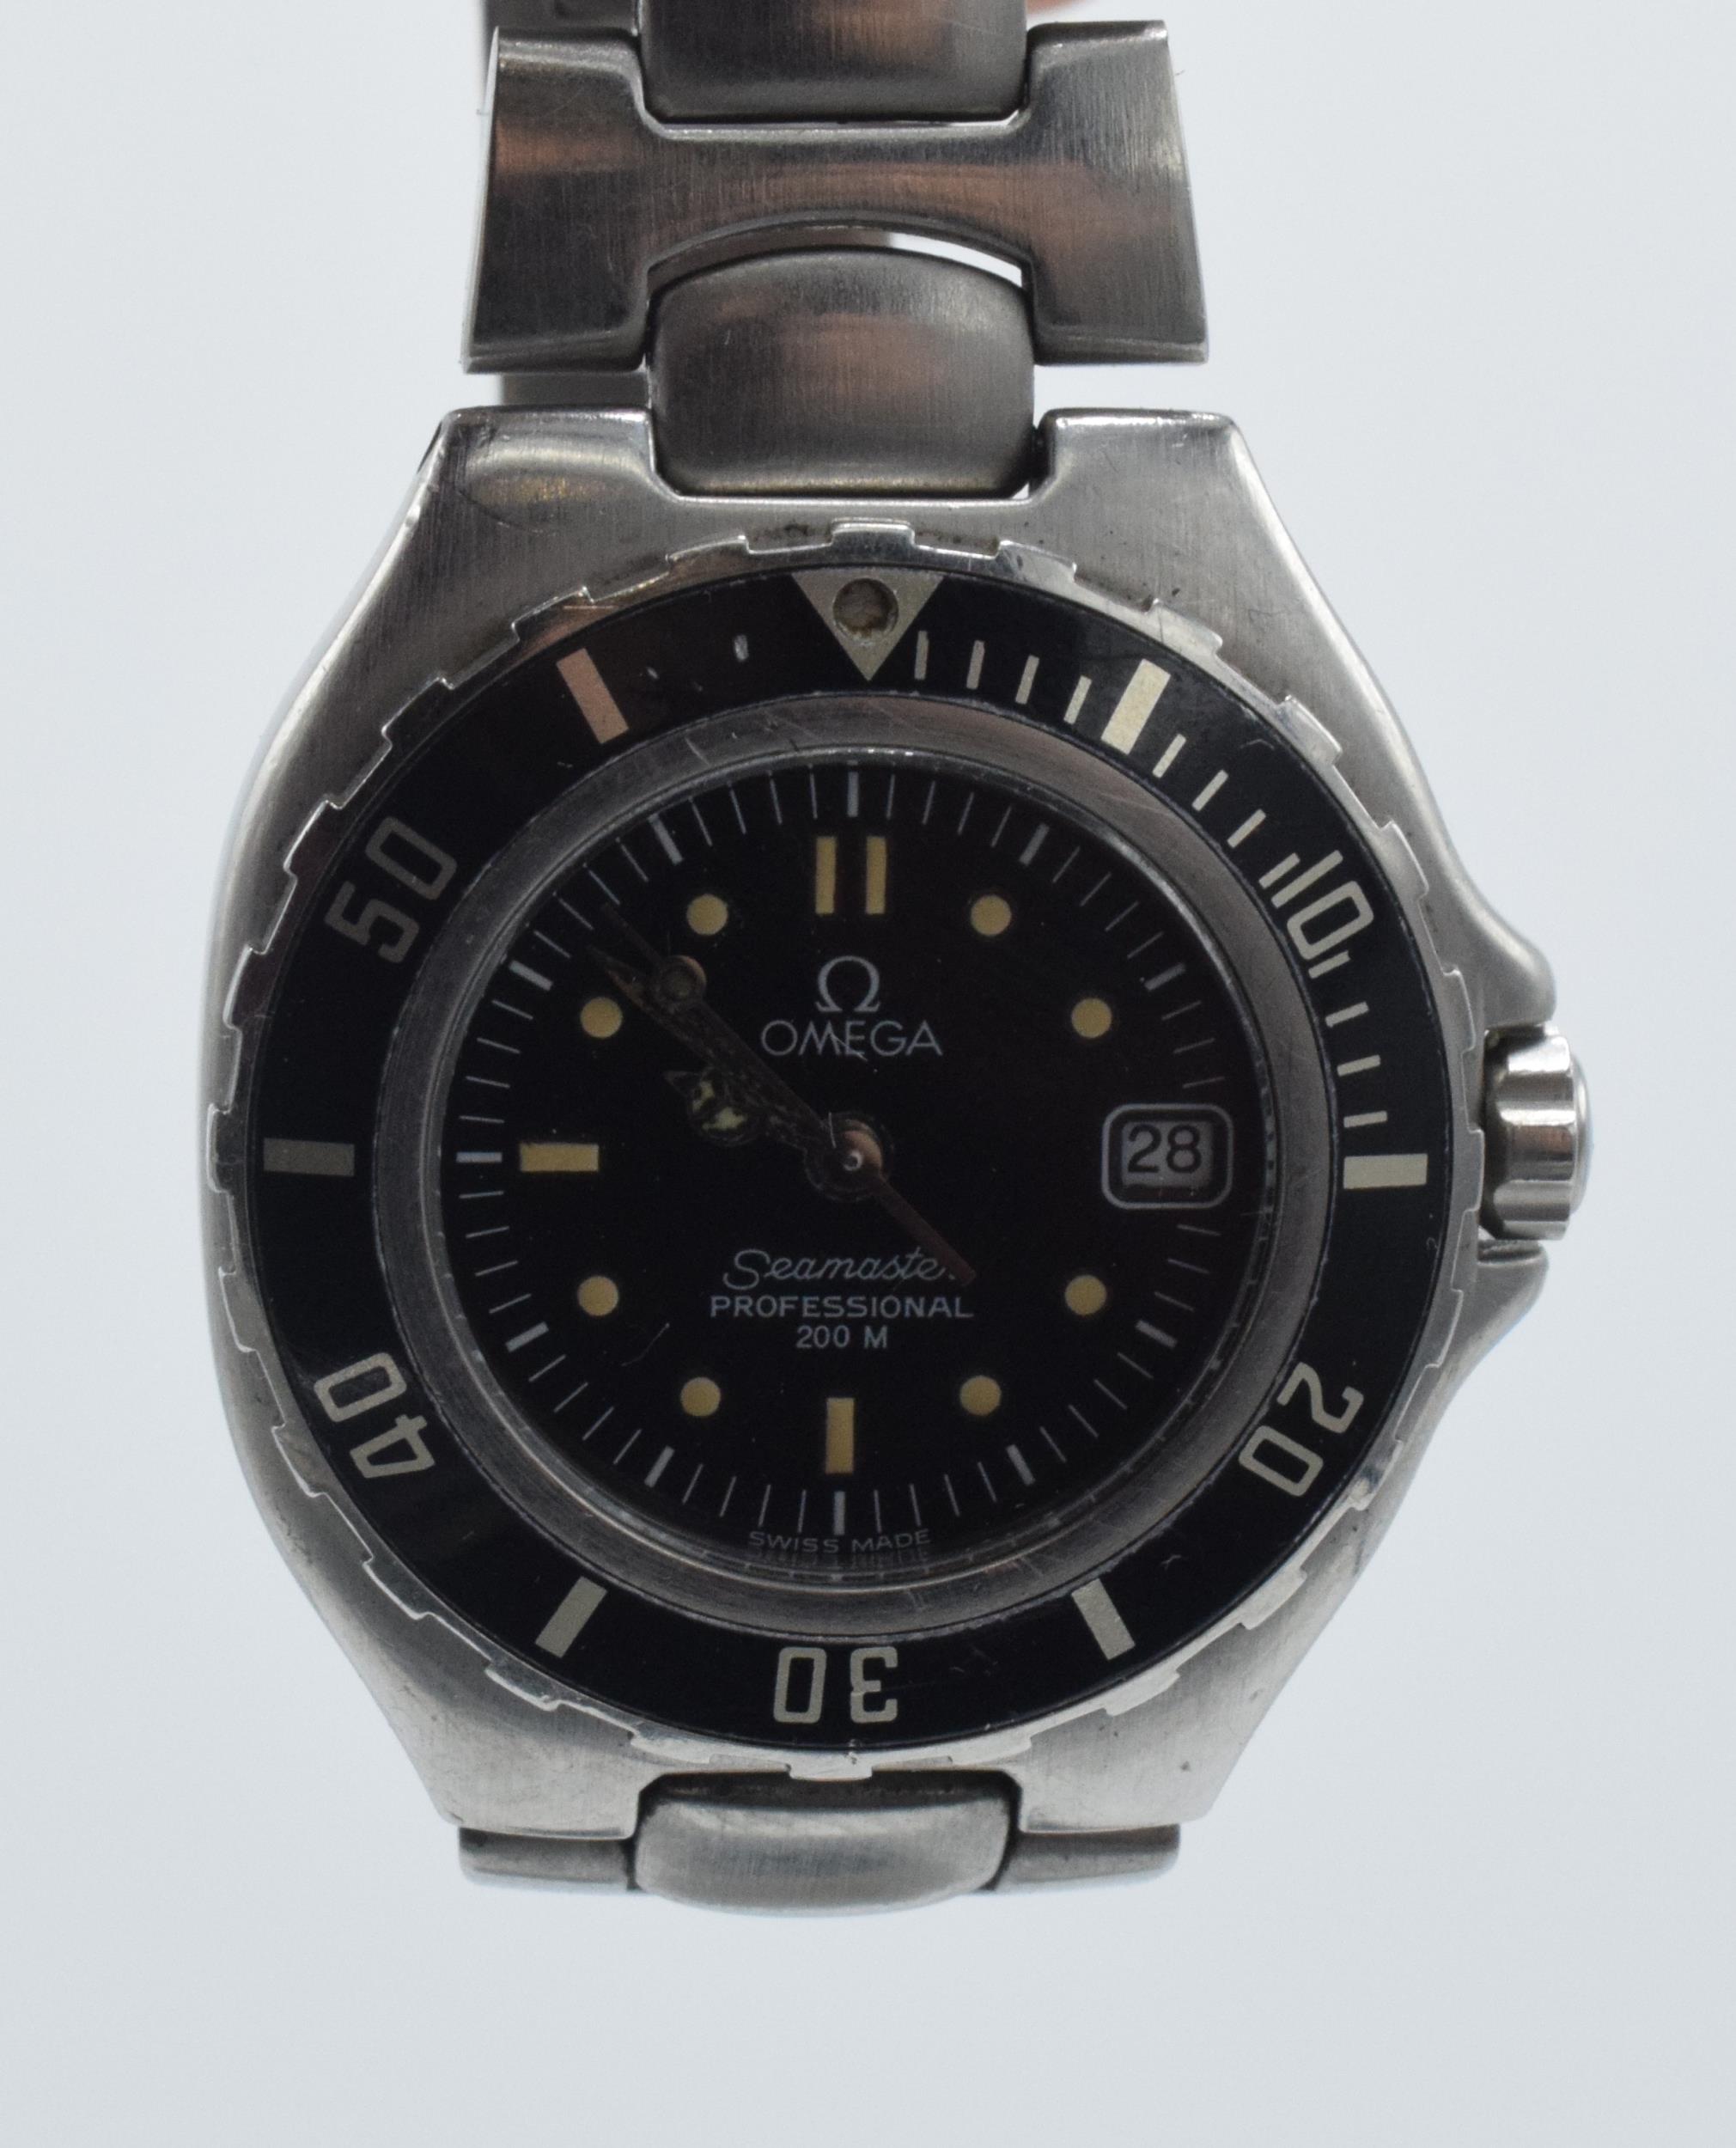 Boxed Omega Seamaster Professional 200 M, stainless steel bracelet, in working / ticking order, 28mm - Image 3 of 6